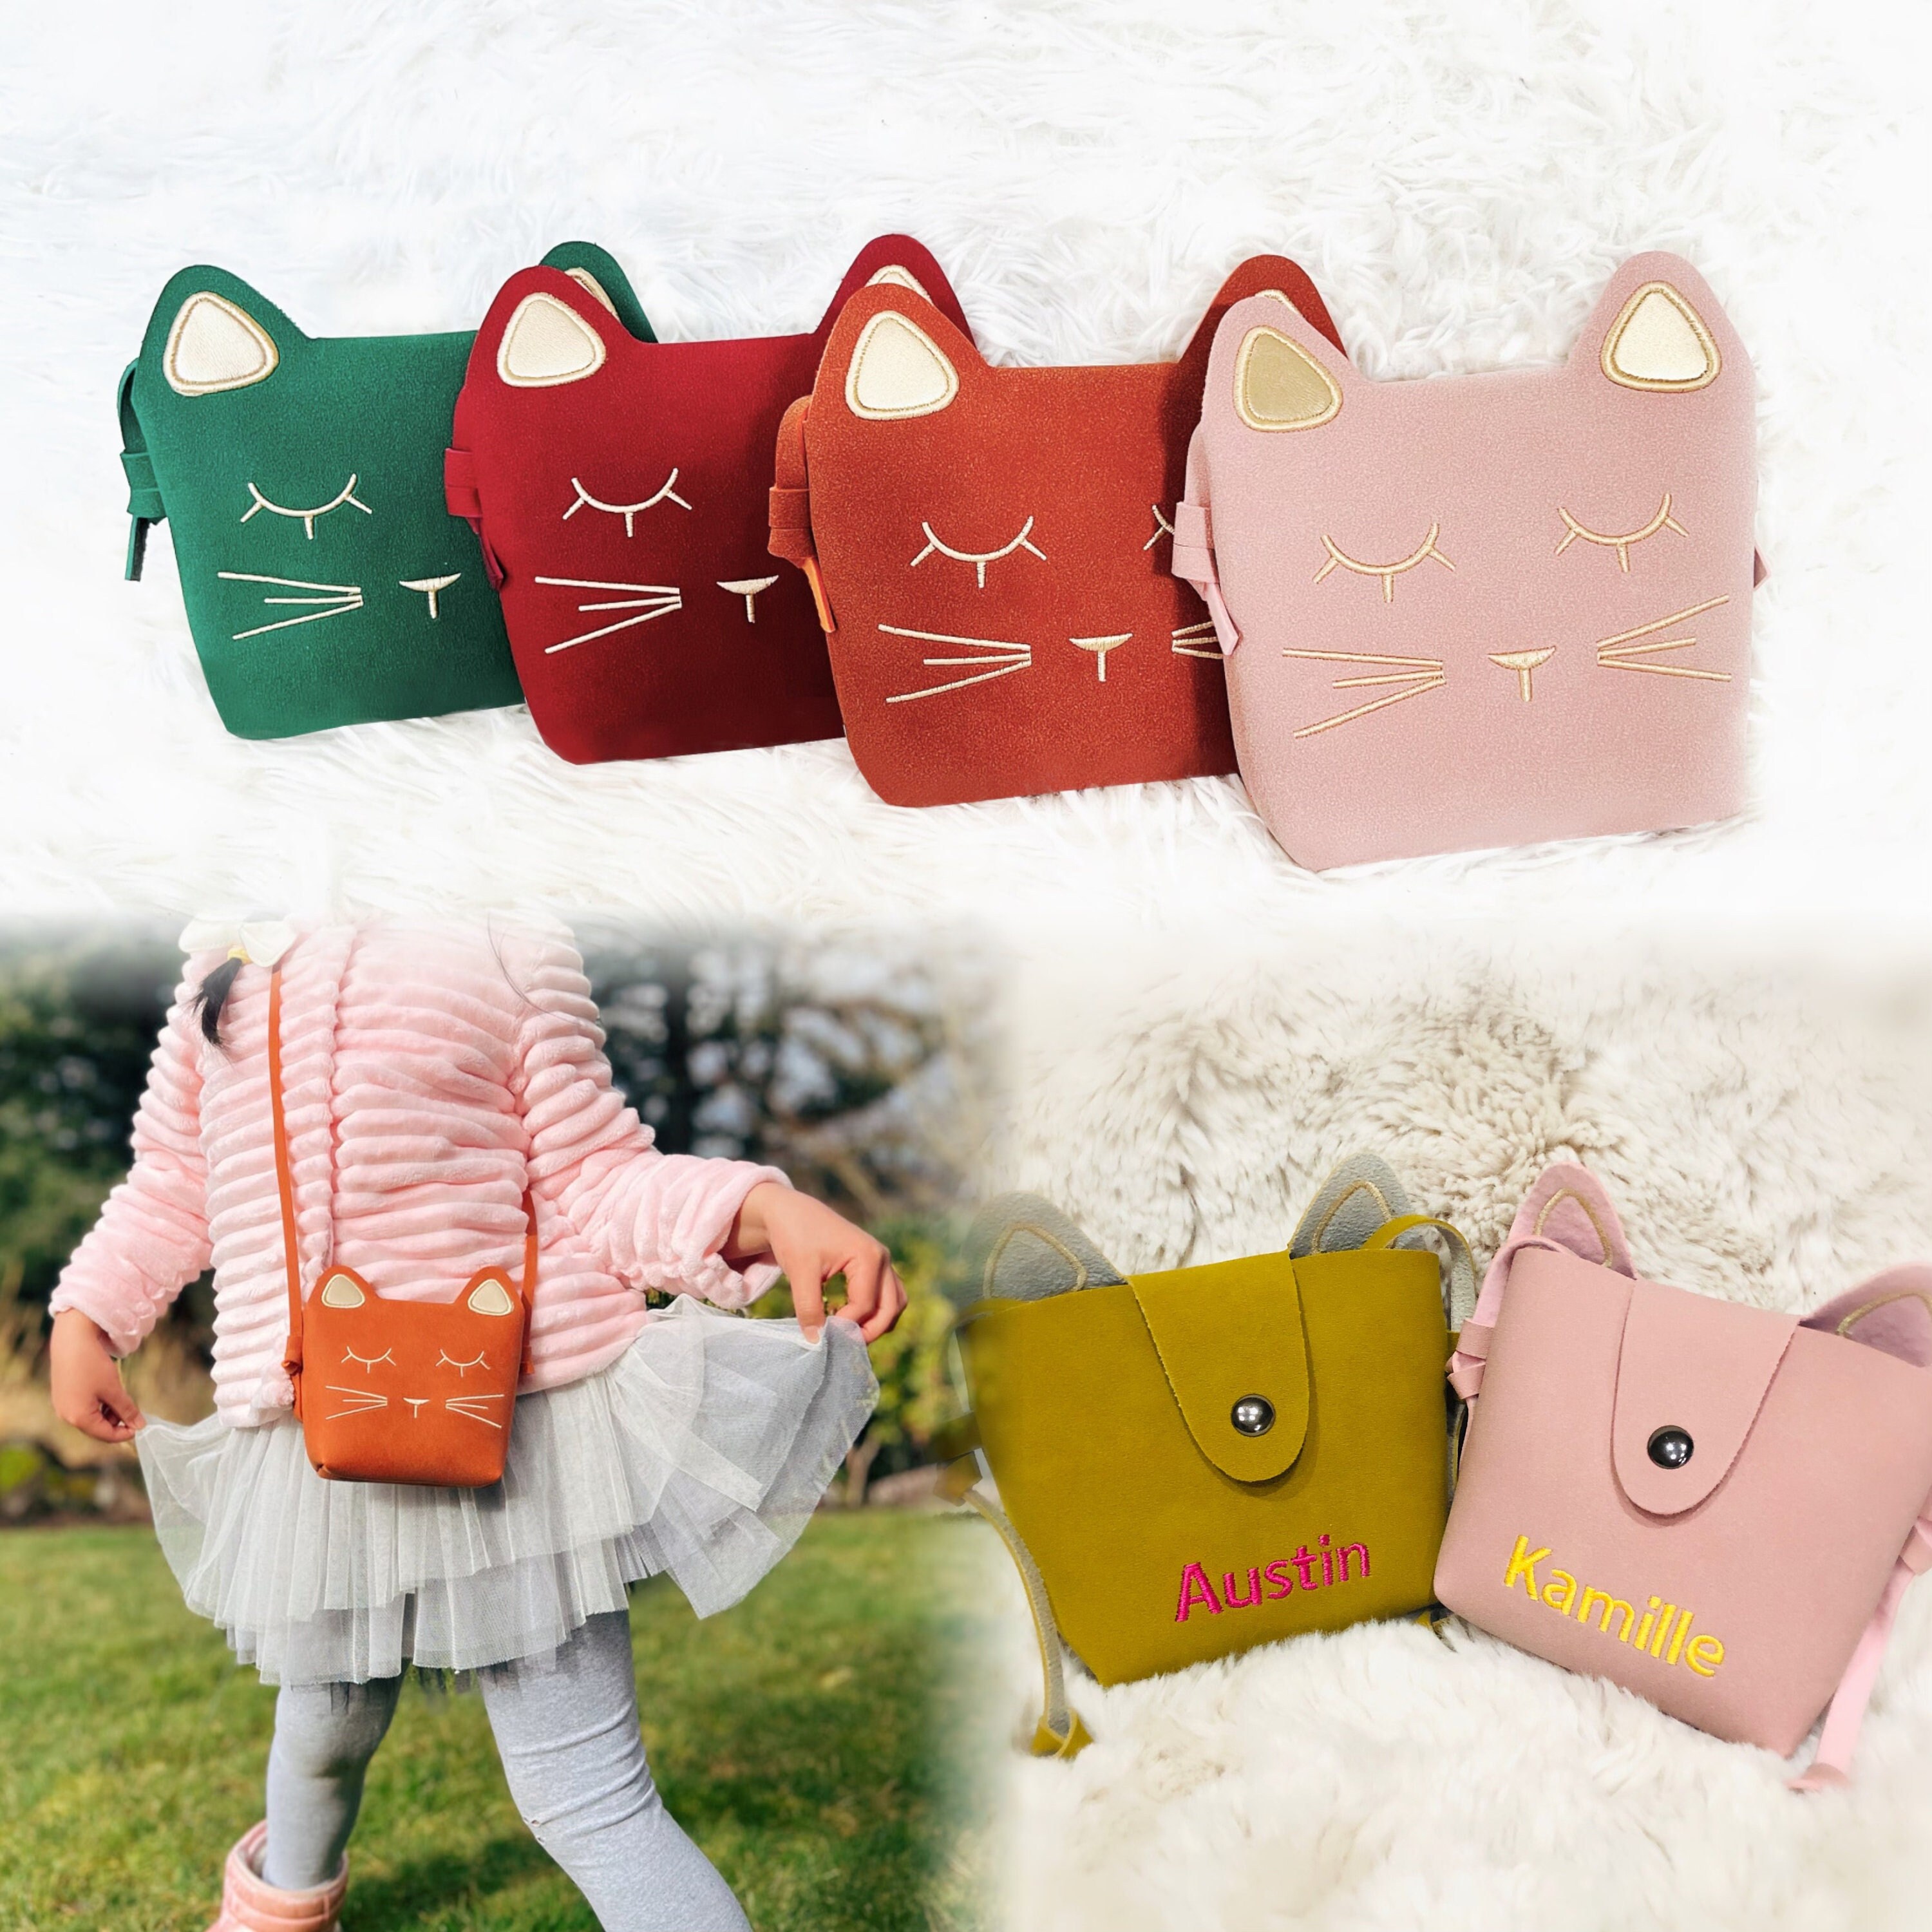 Kawaii Kitty Crossbody Bag with Ribbon Bowknot Wallet Coin Purse Pouch  Kitty Cat Purse Accessories for Women